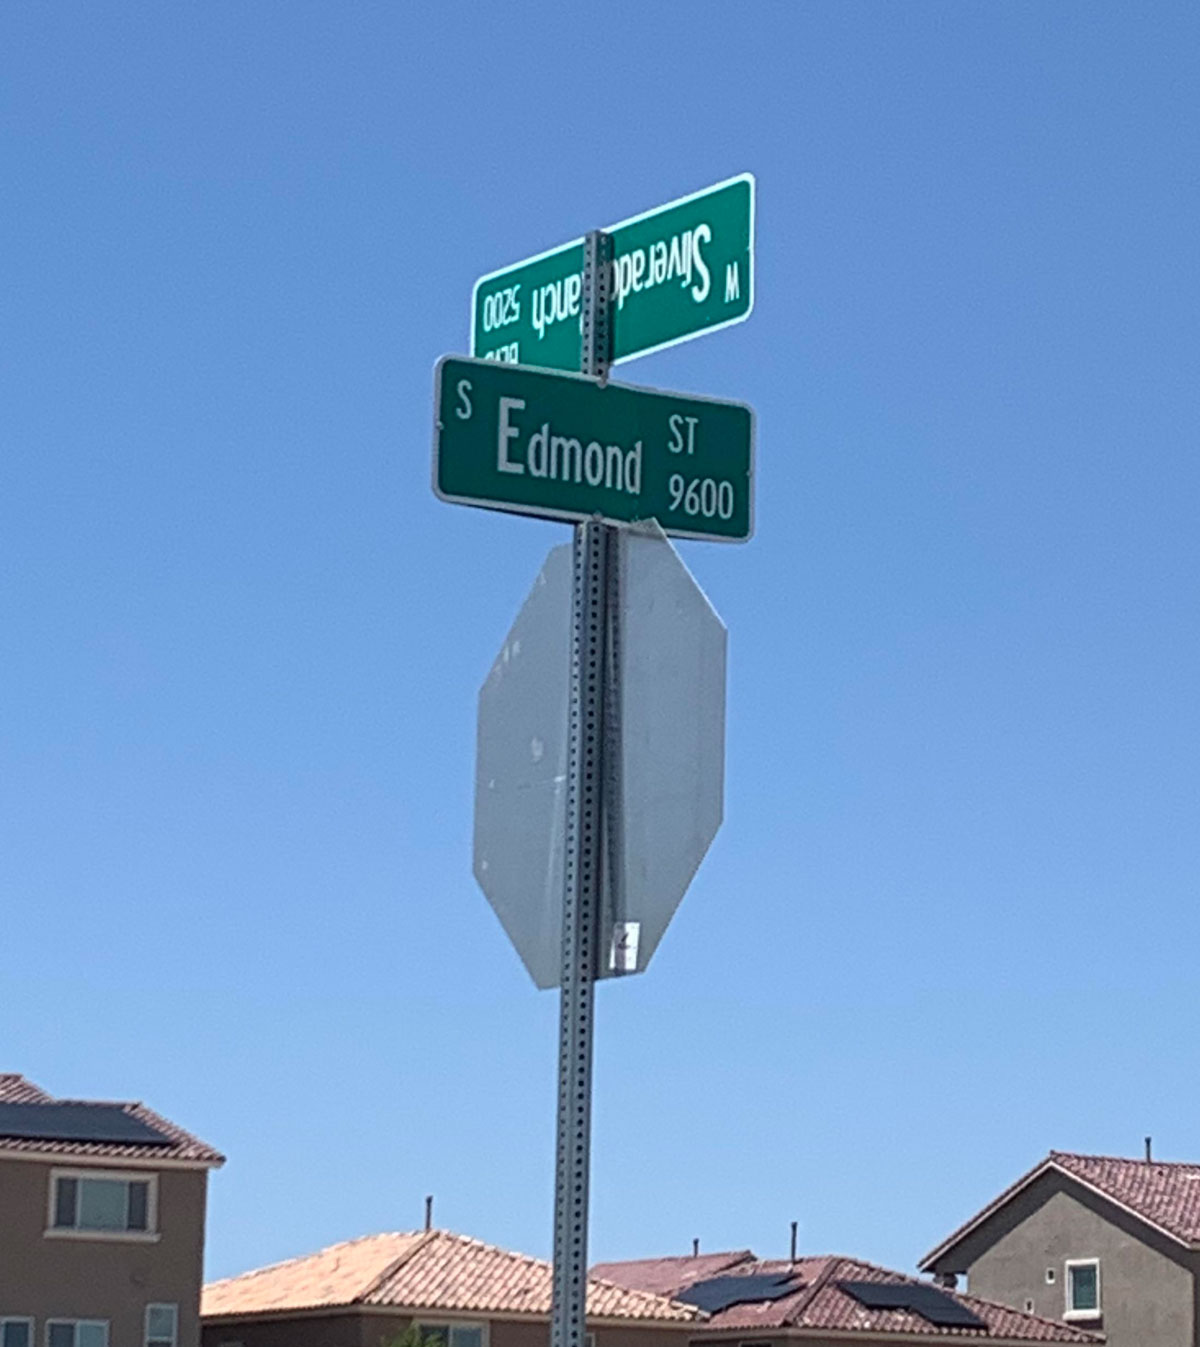 Put the street signs up, boss